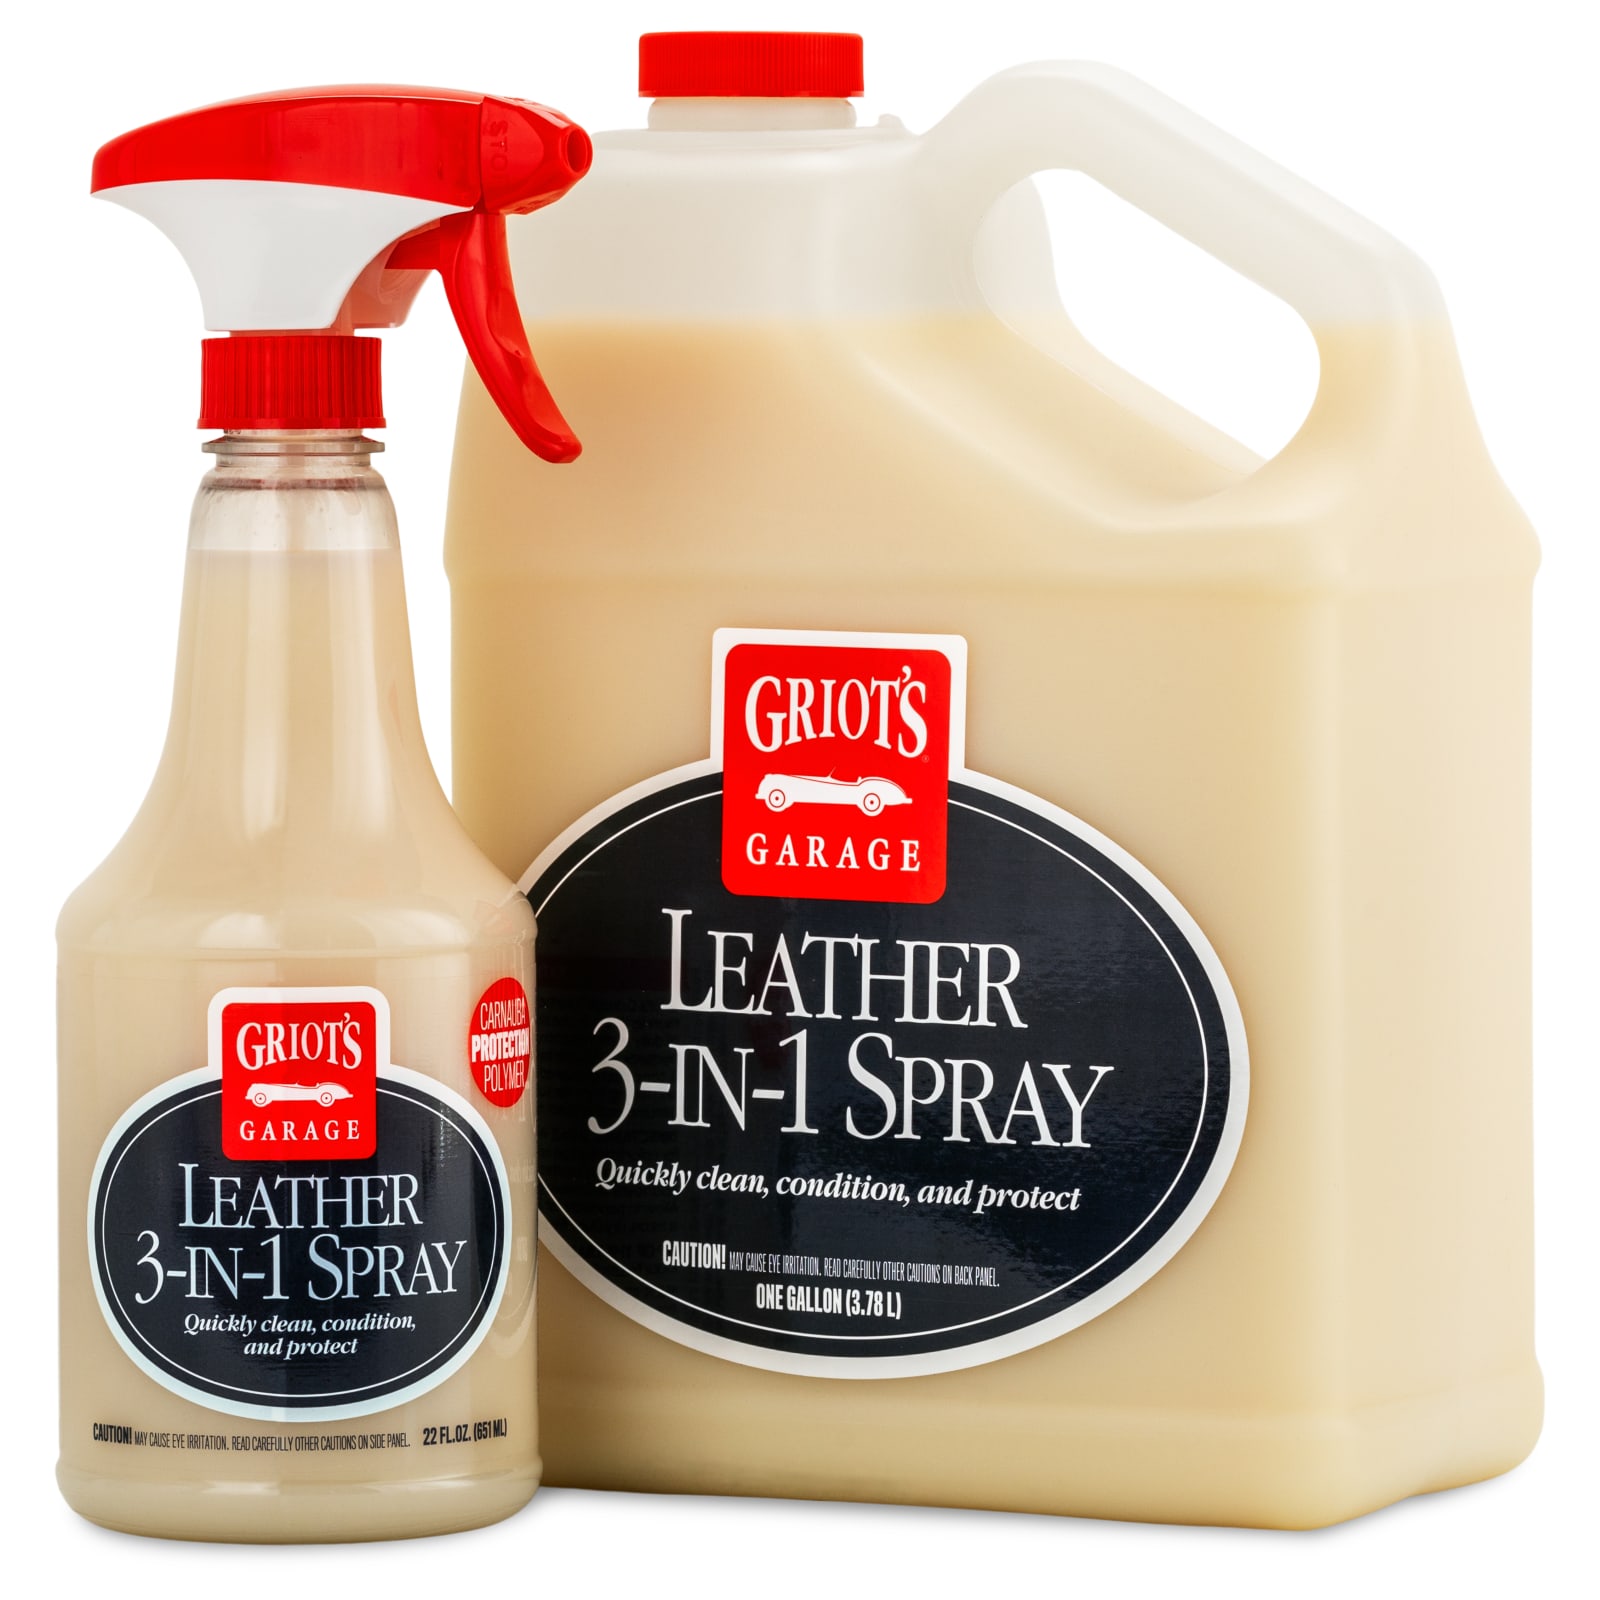 How to Clean, Condition and Protect Leather